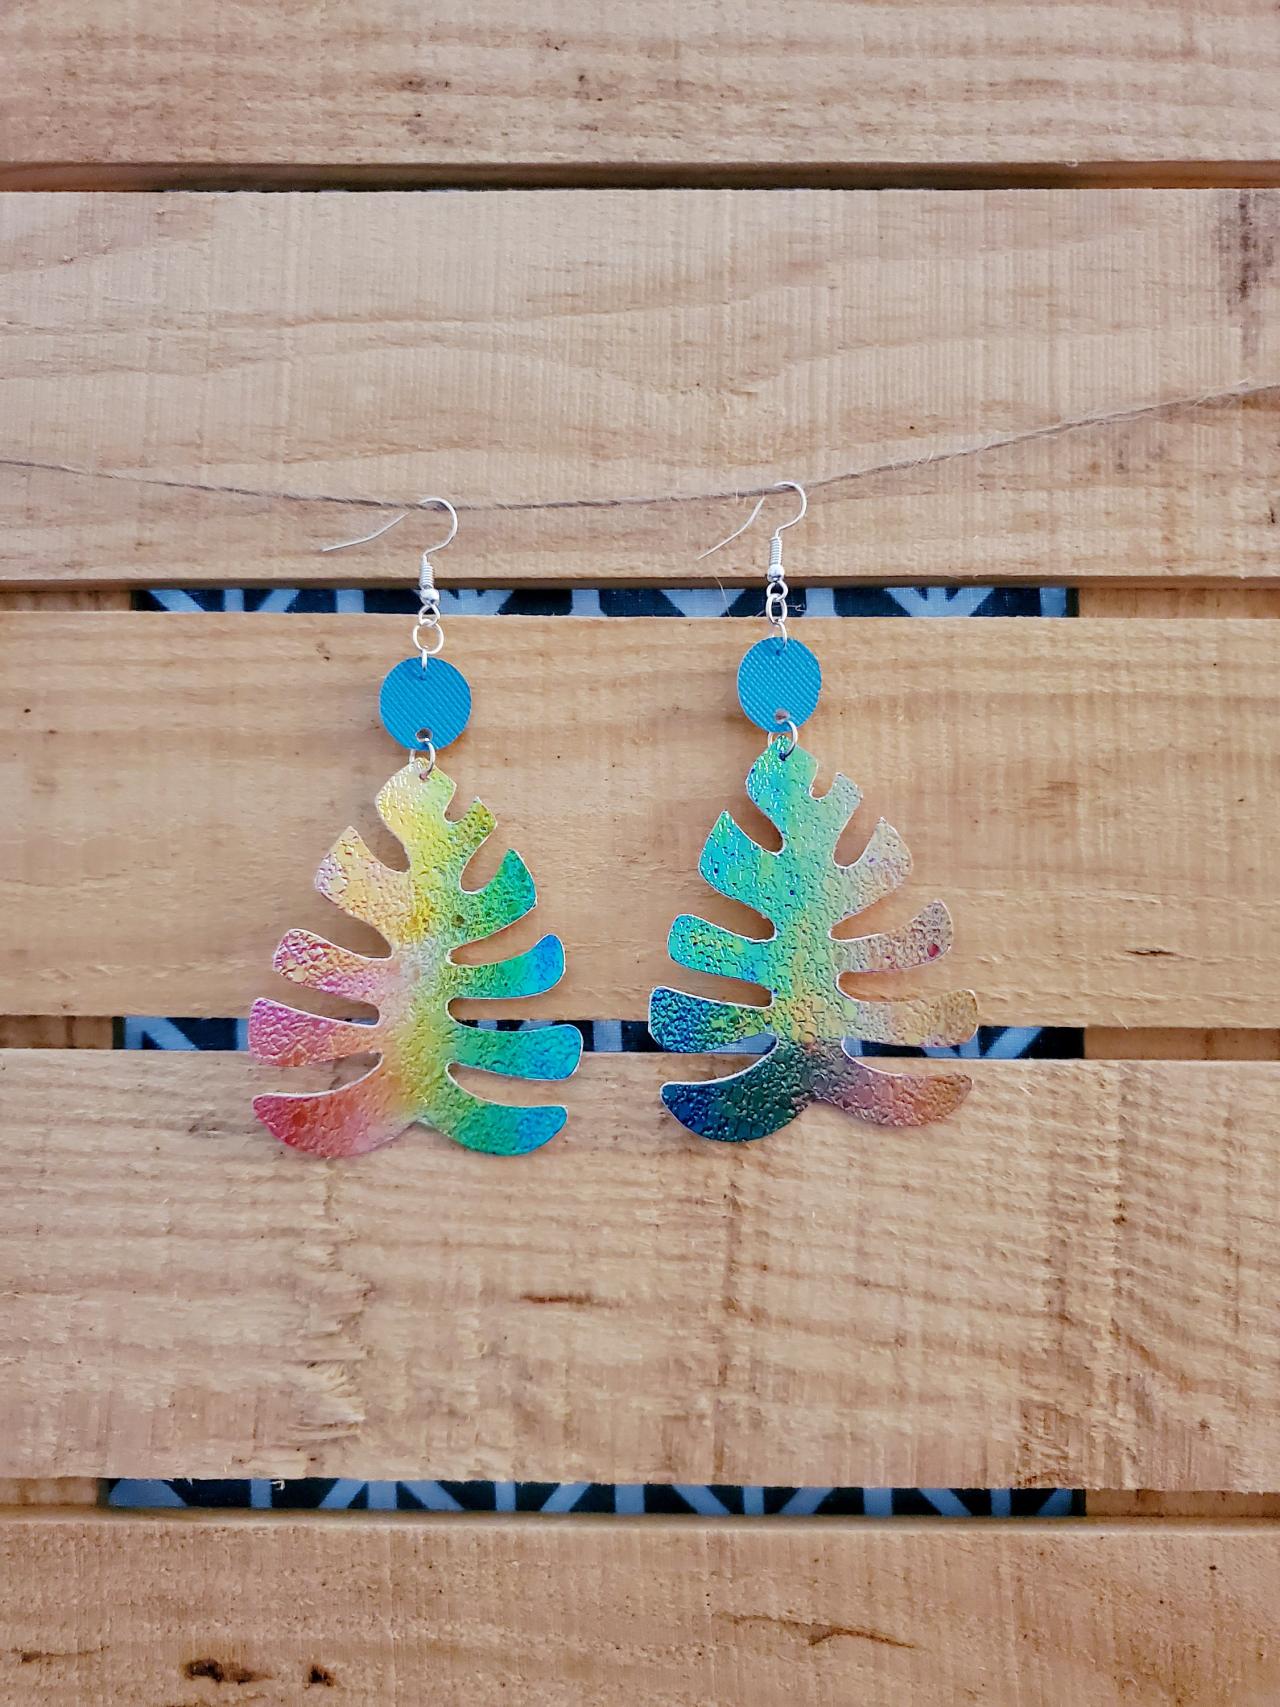 Metallic Rainbow Monstera Leather Earrings, Floral Earrings, Leather Dangle Jewelry, Sparkly Earrings, Cocktail Jewelry, Turquoise Earrings